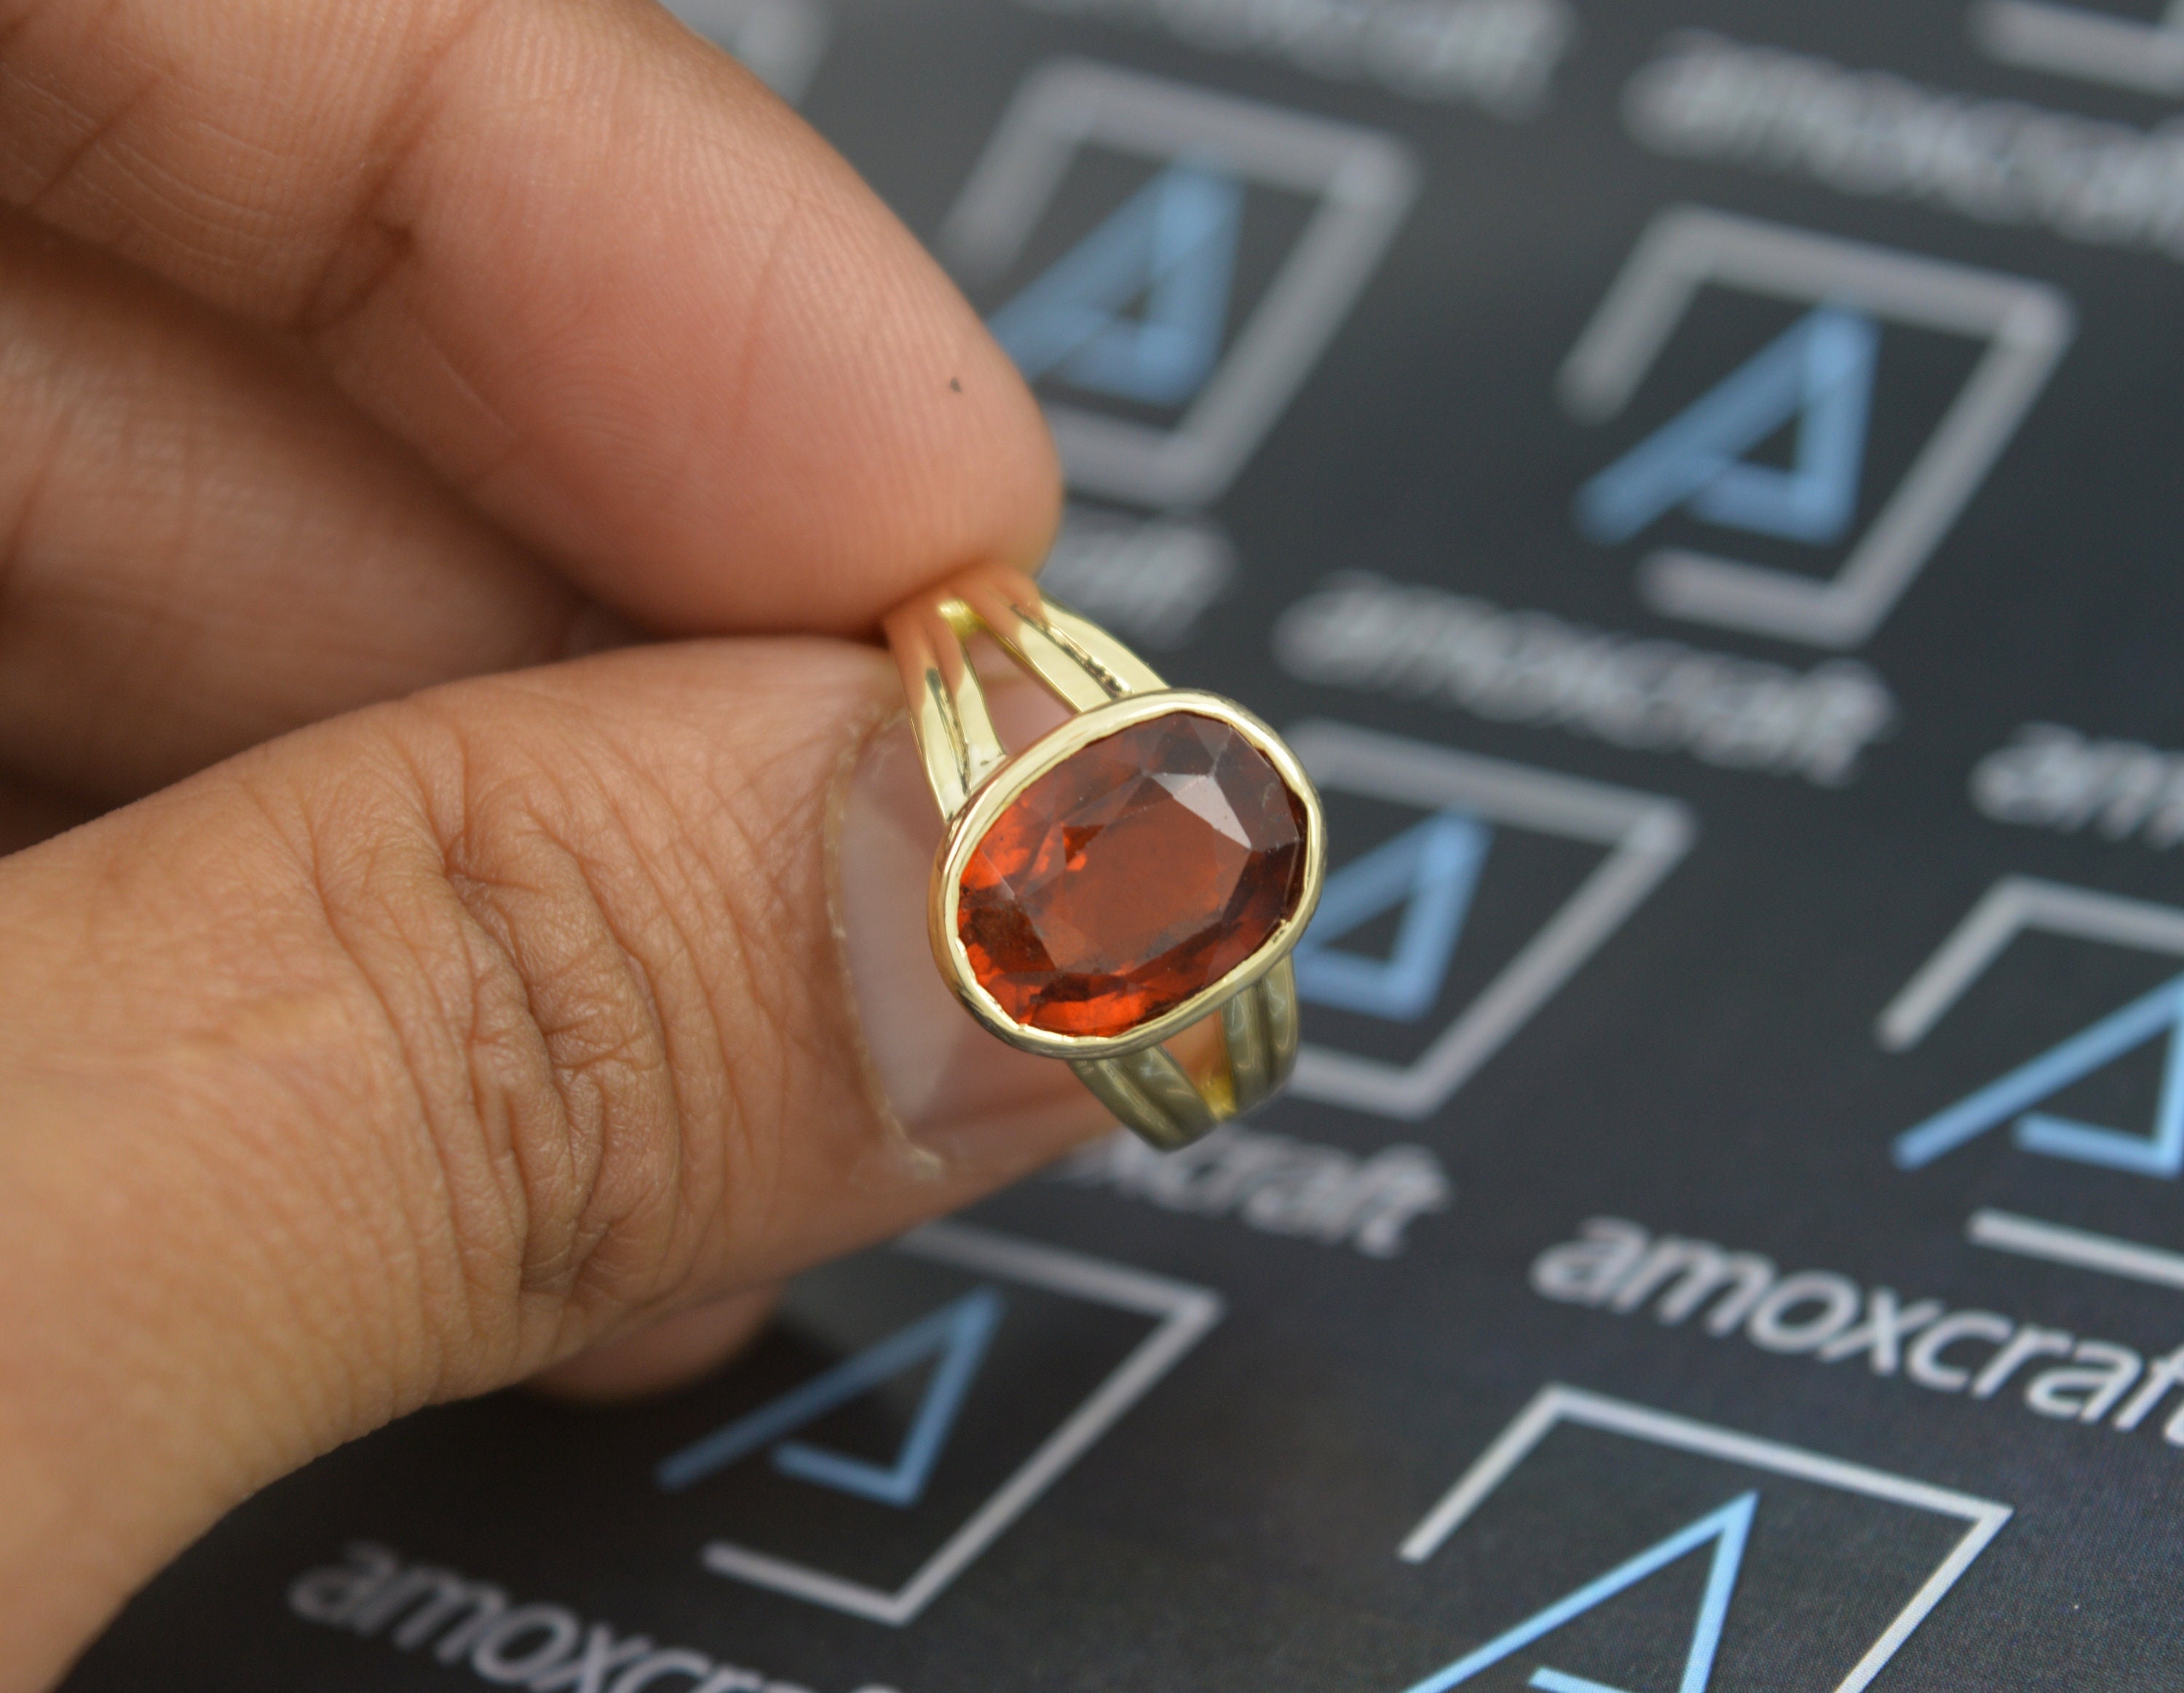 925 Sterling Silver Hessonite Stone Ring, Weight: 2g, 7 Inch